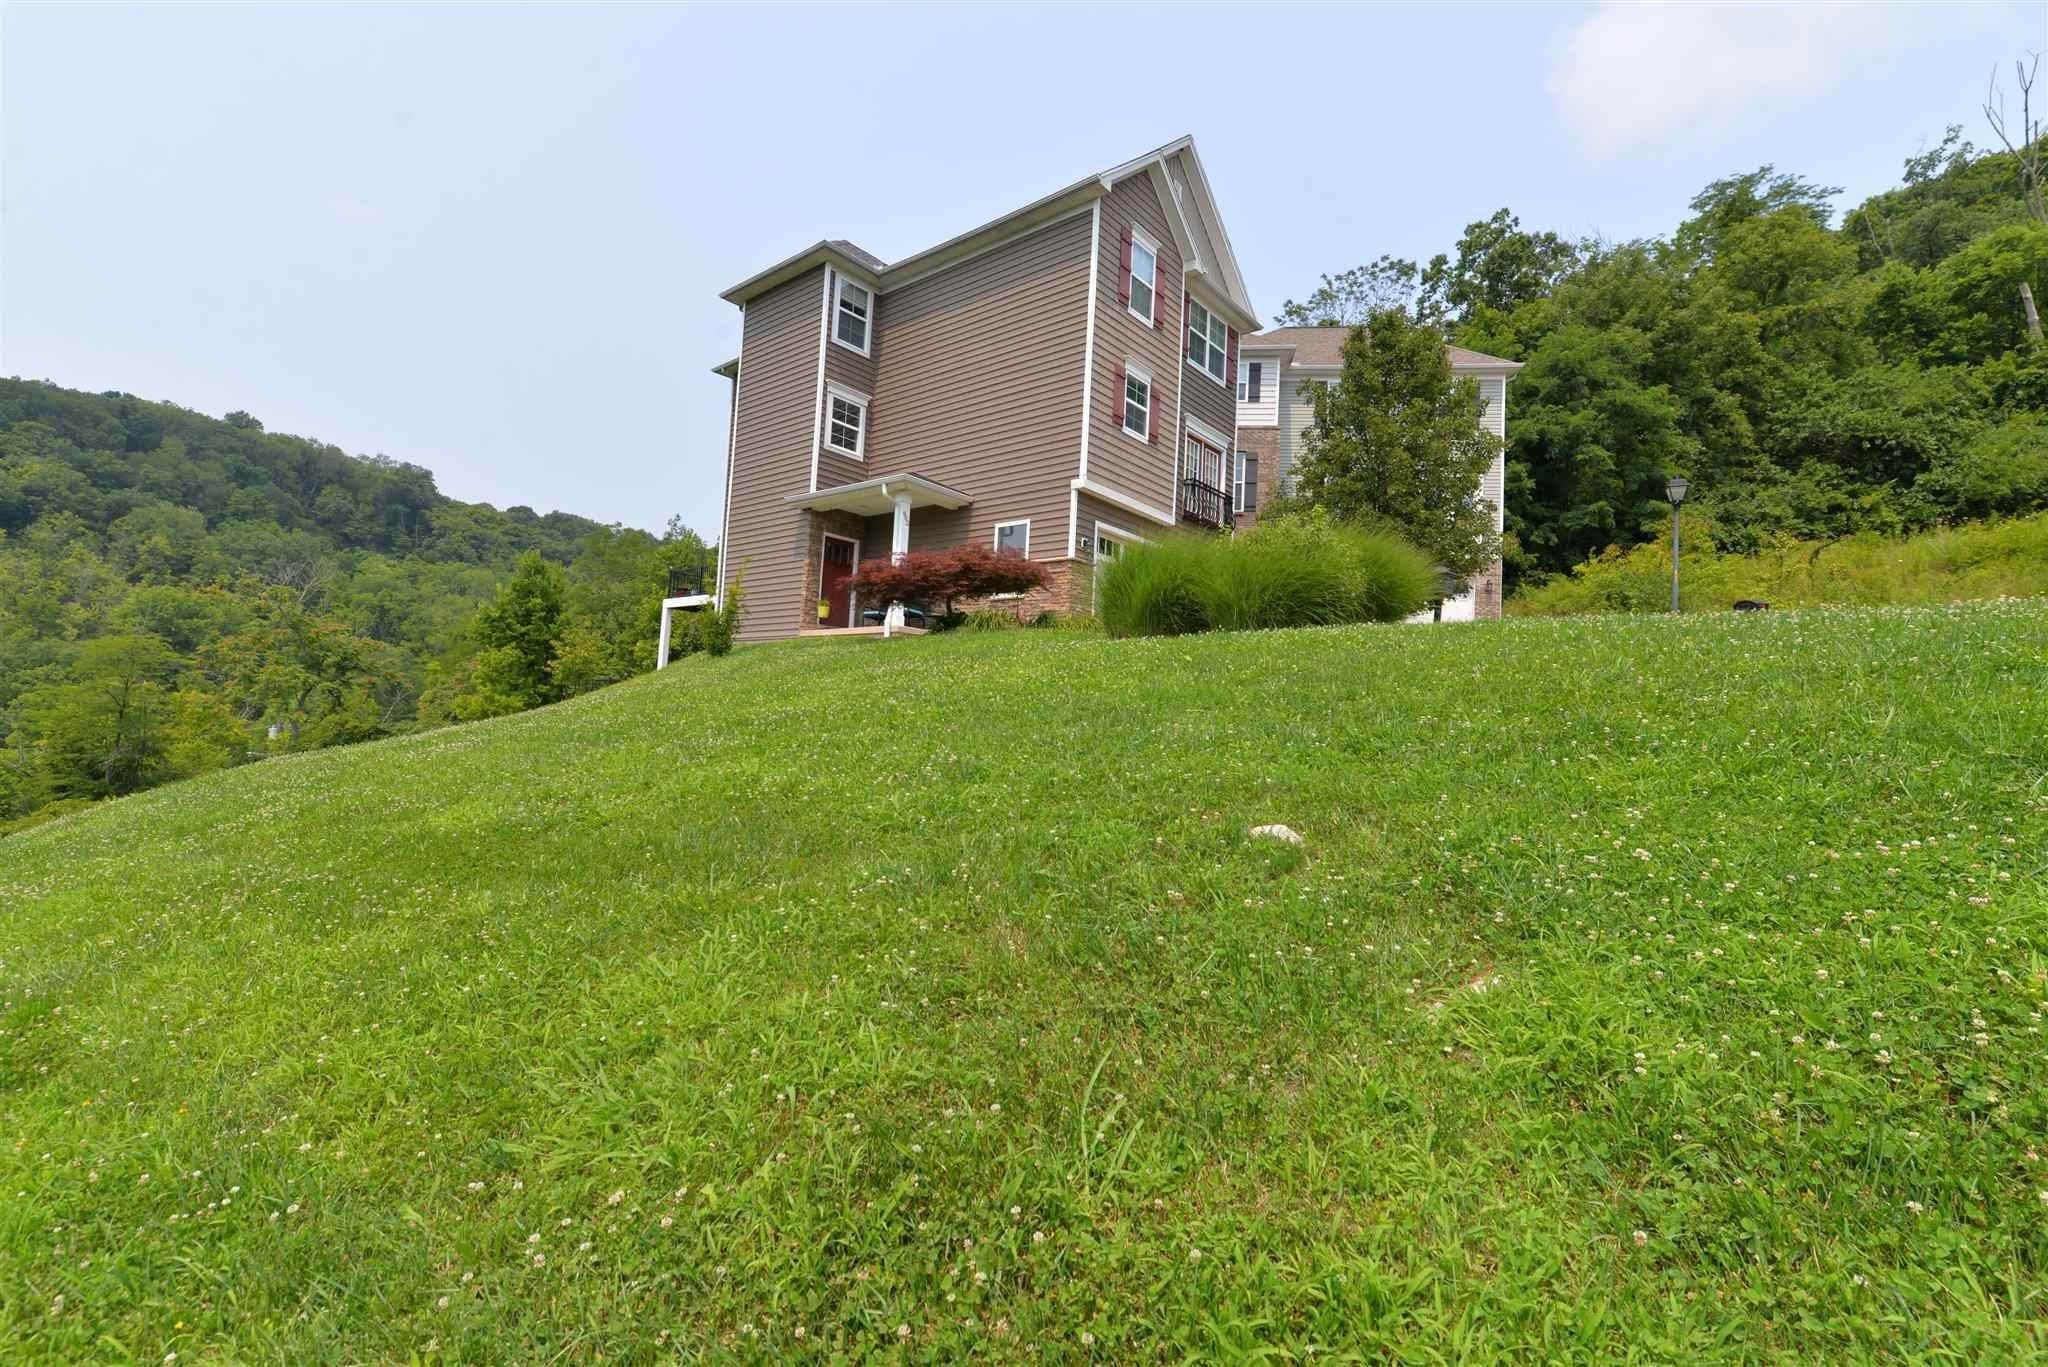 20. Single Family Homes for Sale at 0 Kyles Lookout 0 Kyles Lookout Fort Wright, Kentucky 41017 United States